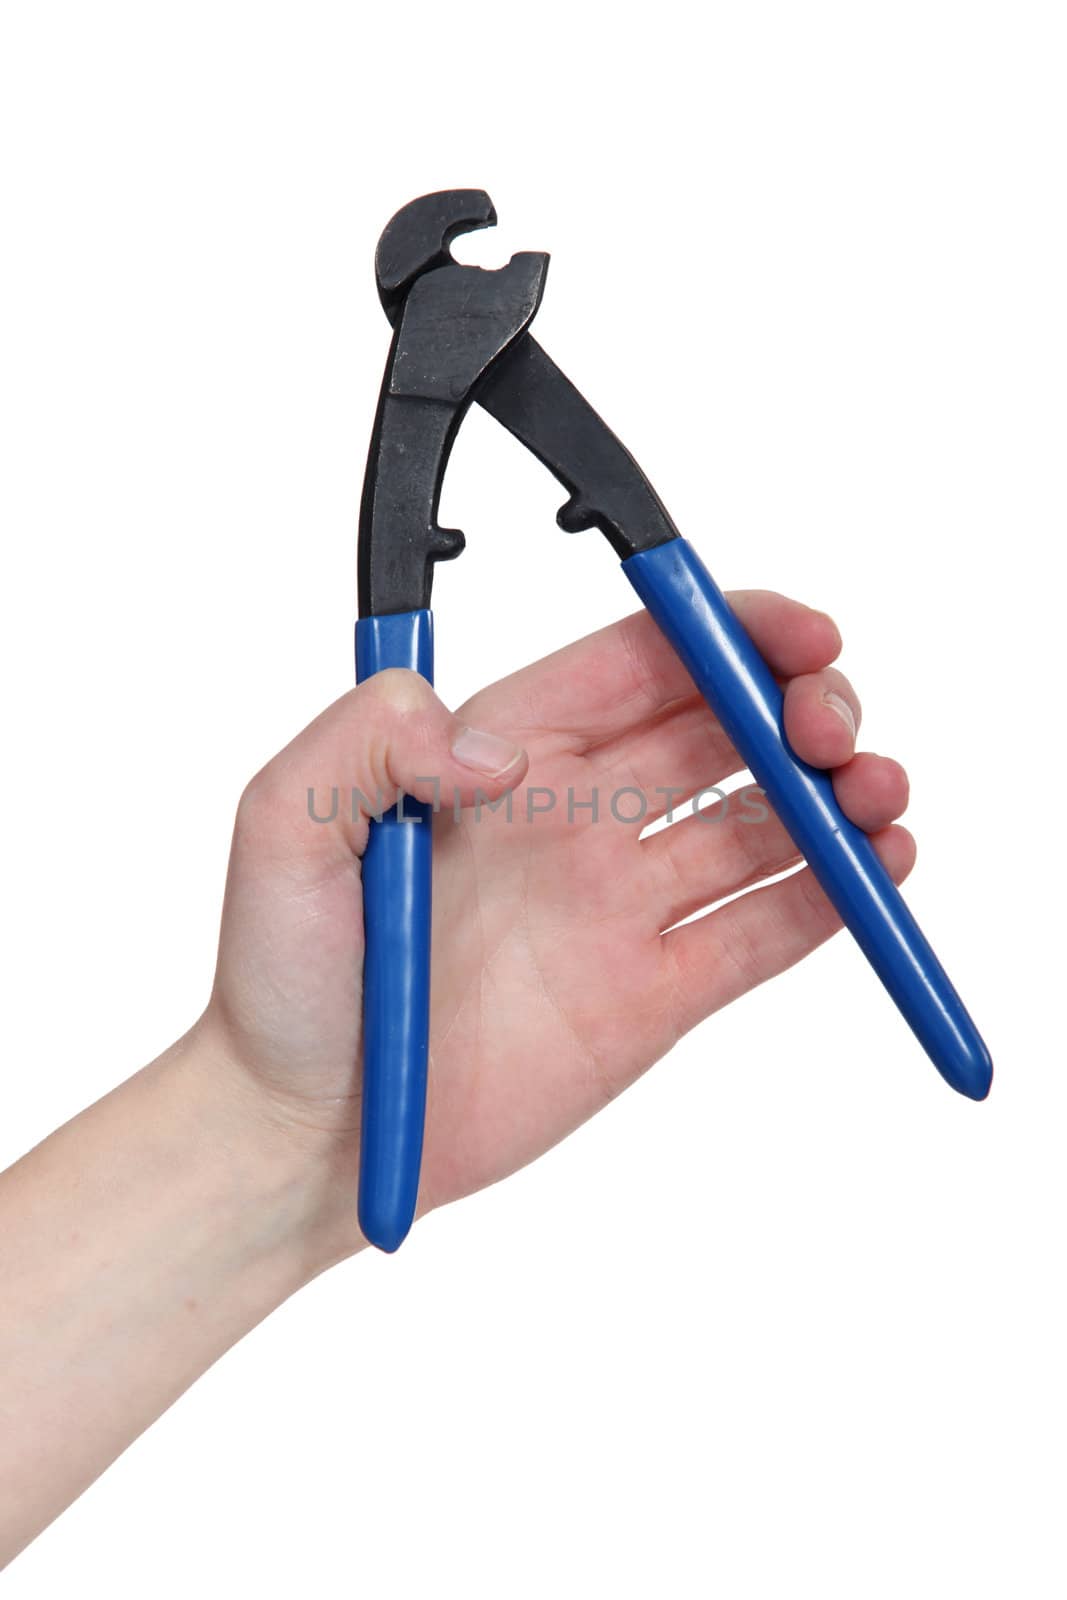 hand holding pliers